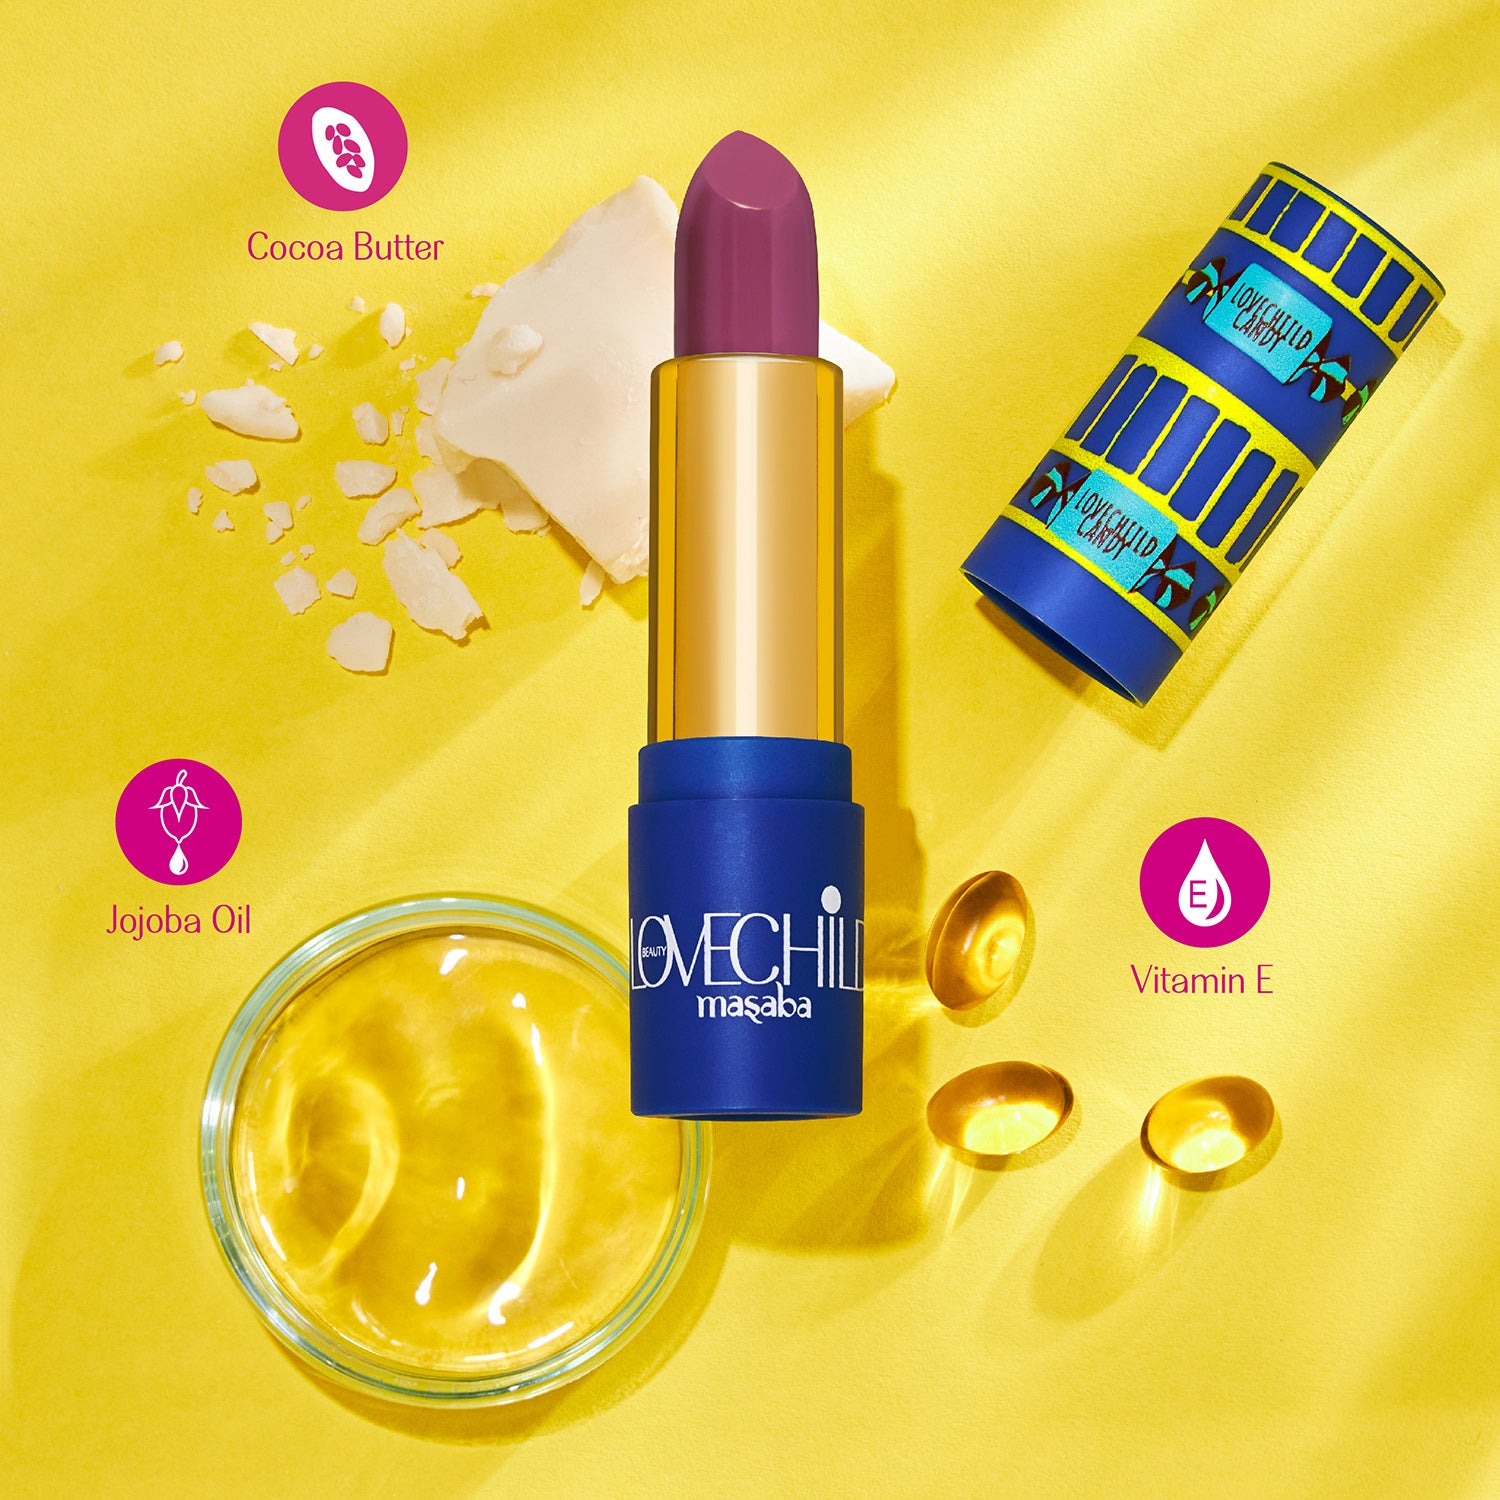 LoveChild Masaba - For the Kid in You! - 06 Mint-To-Be - Luxe Matte Lipstick